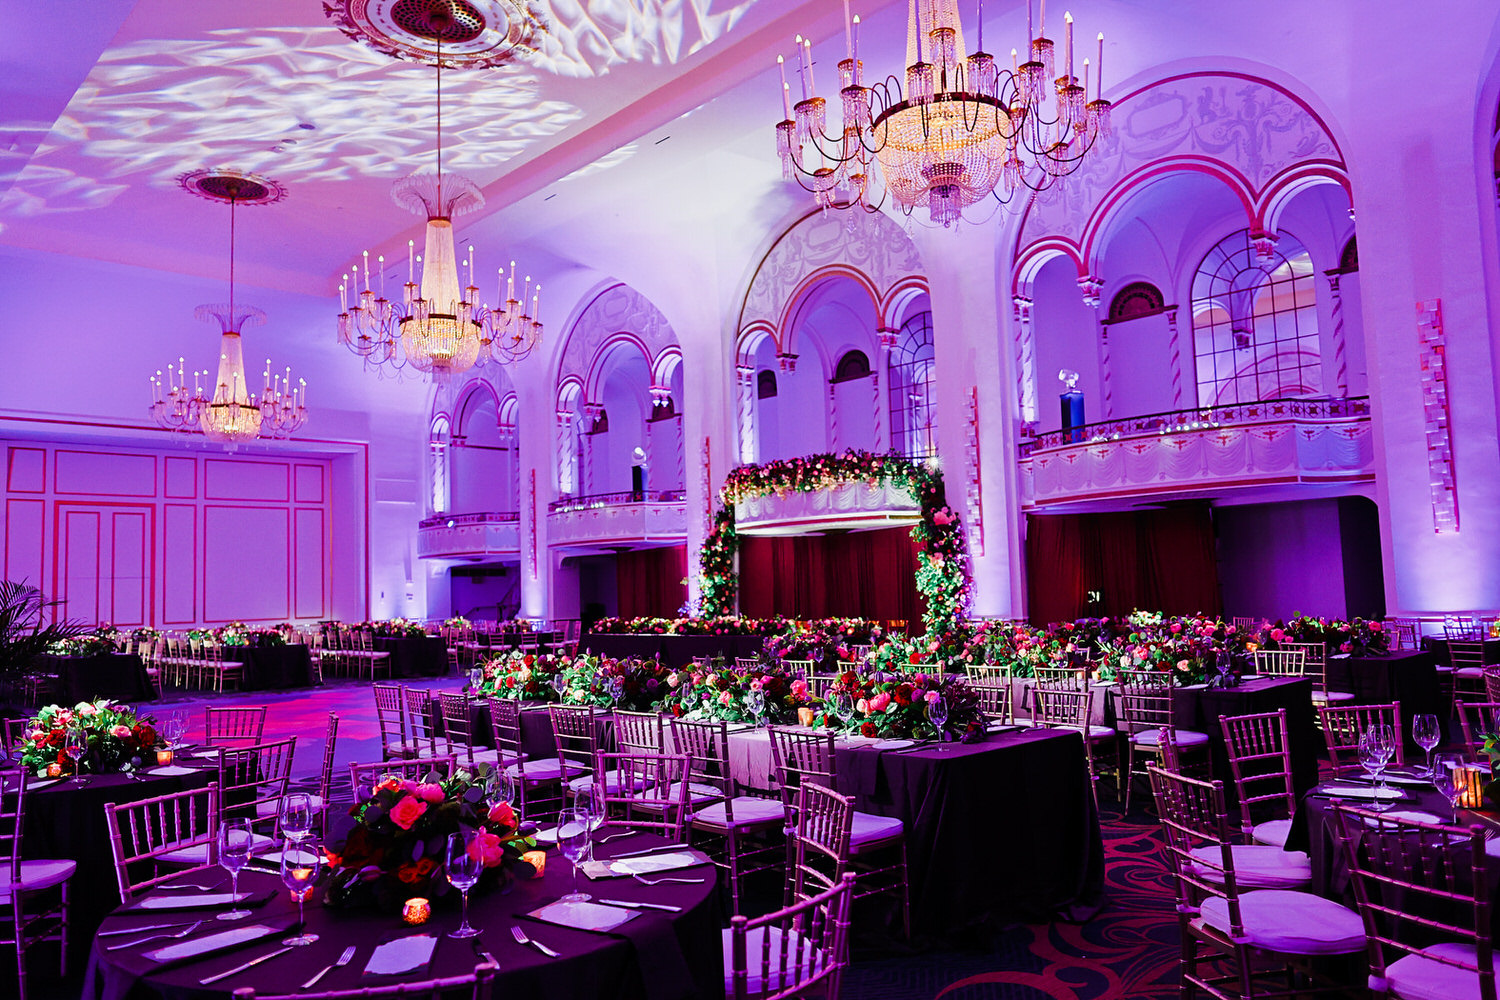 a banquet hall with tables, chairs, and chandeliers.